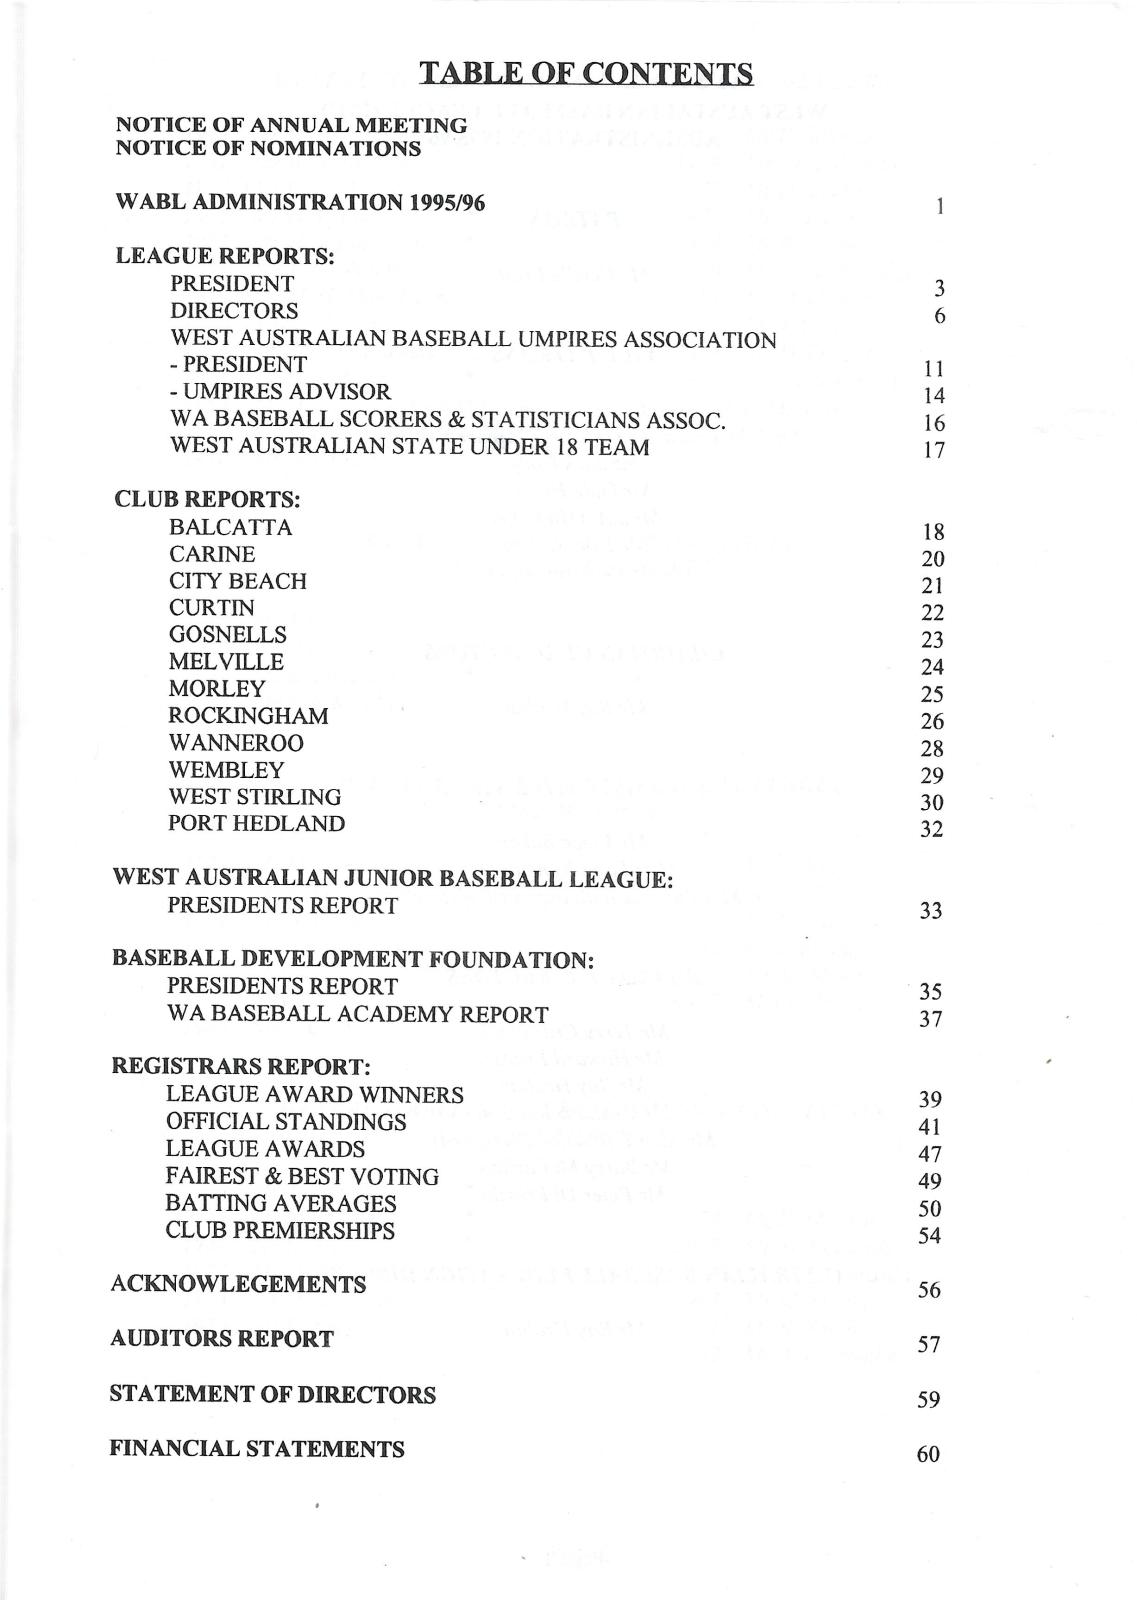 West Australian Baseball League 61st Annual Report 1995-96 index page